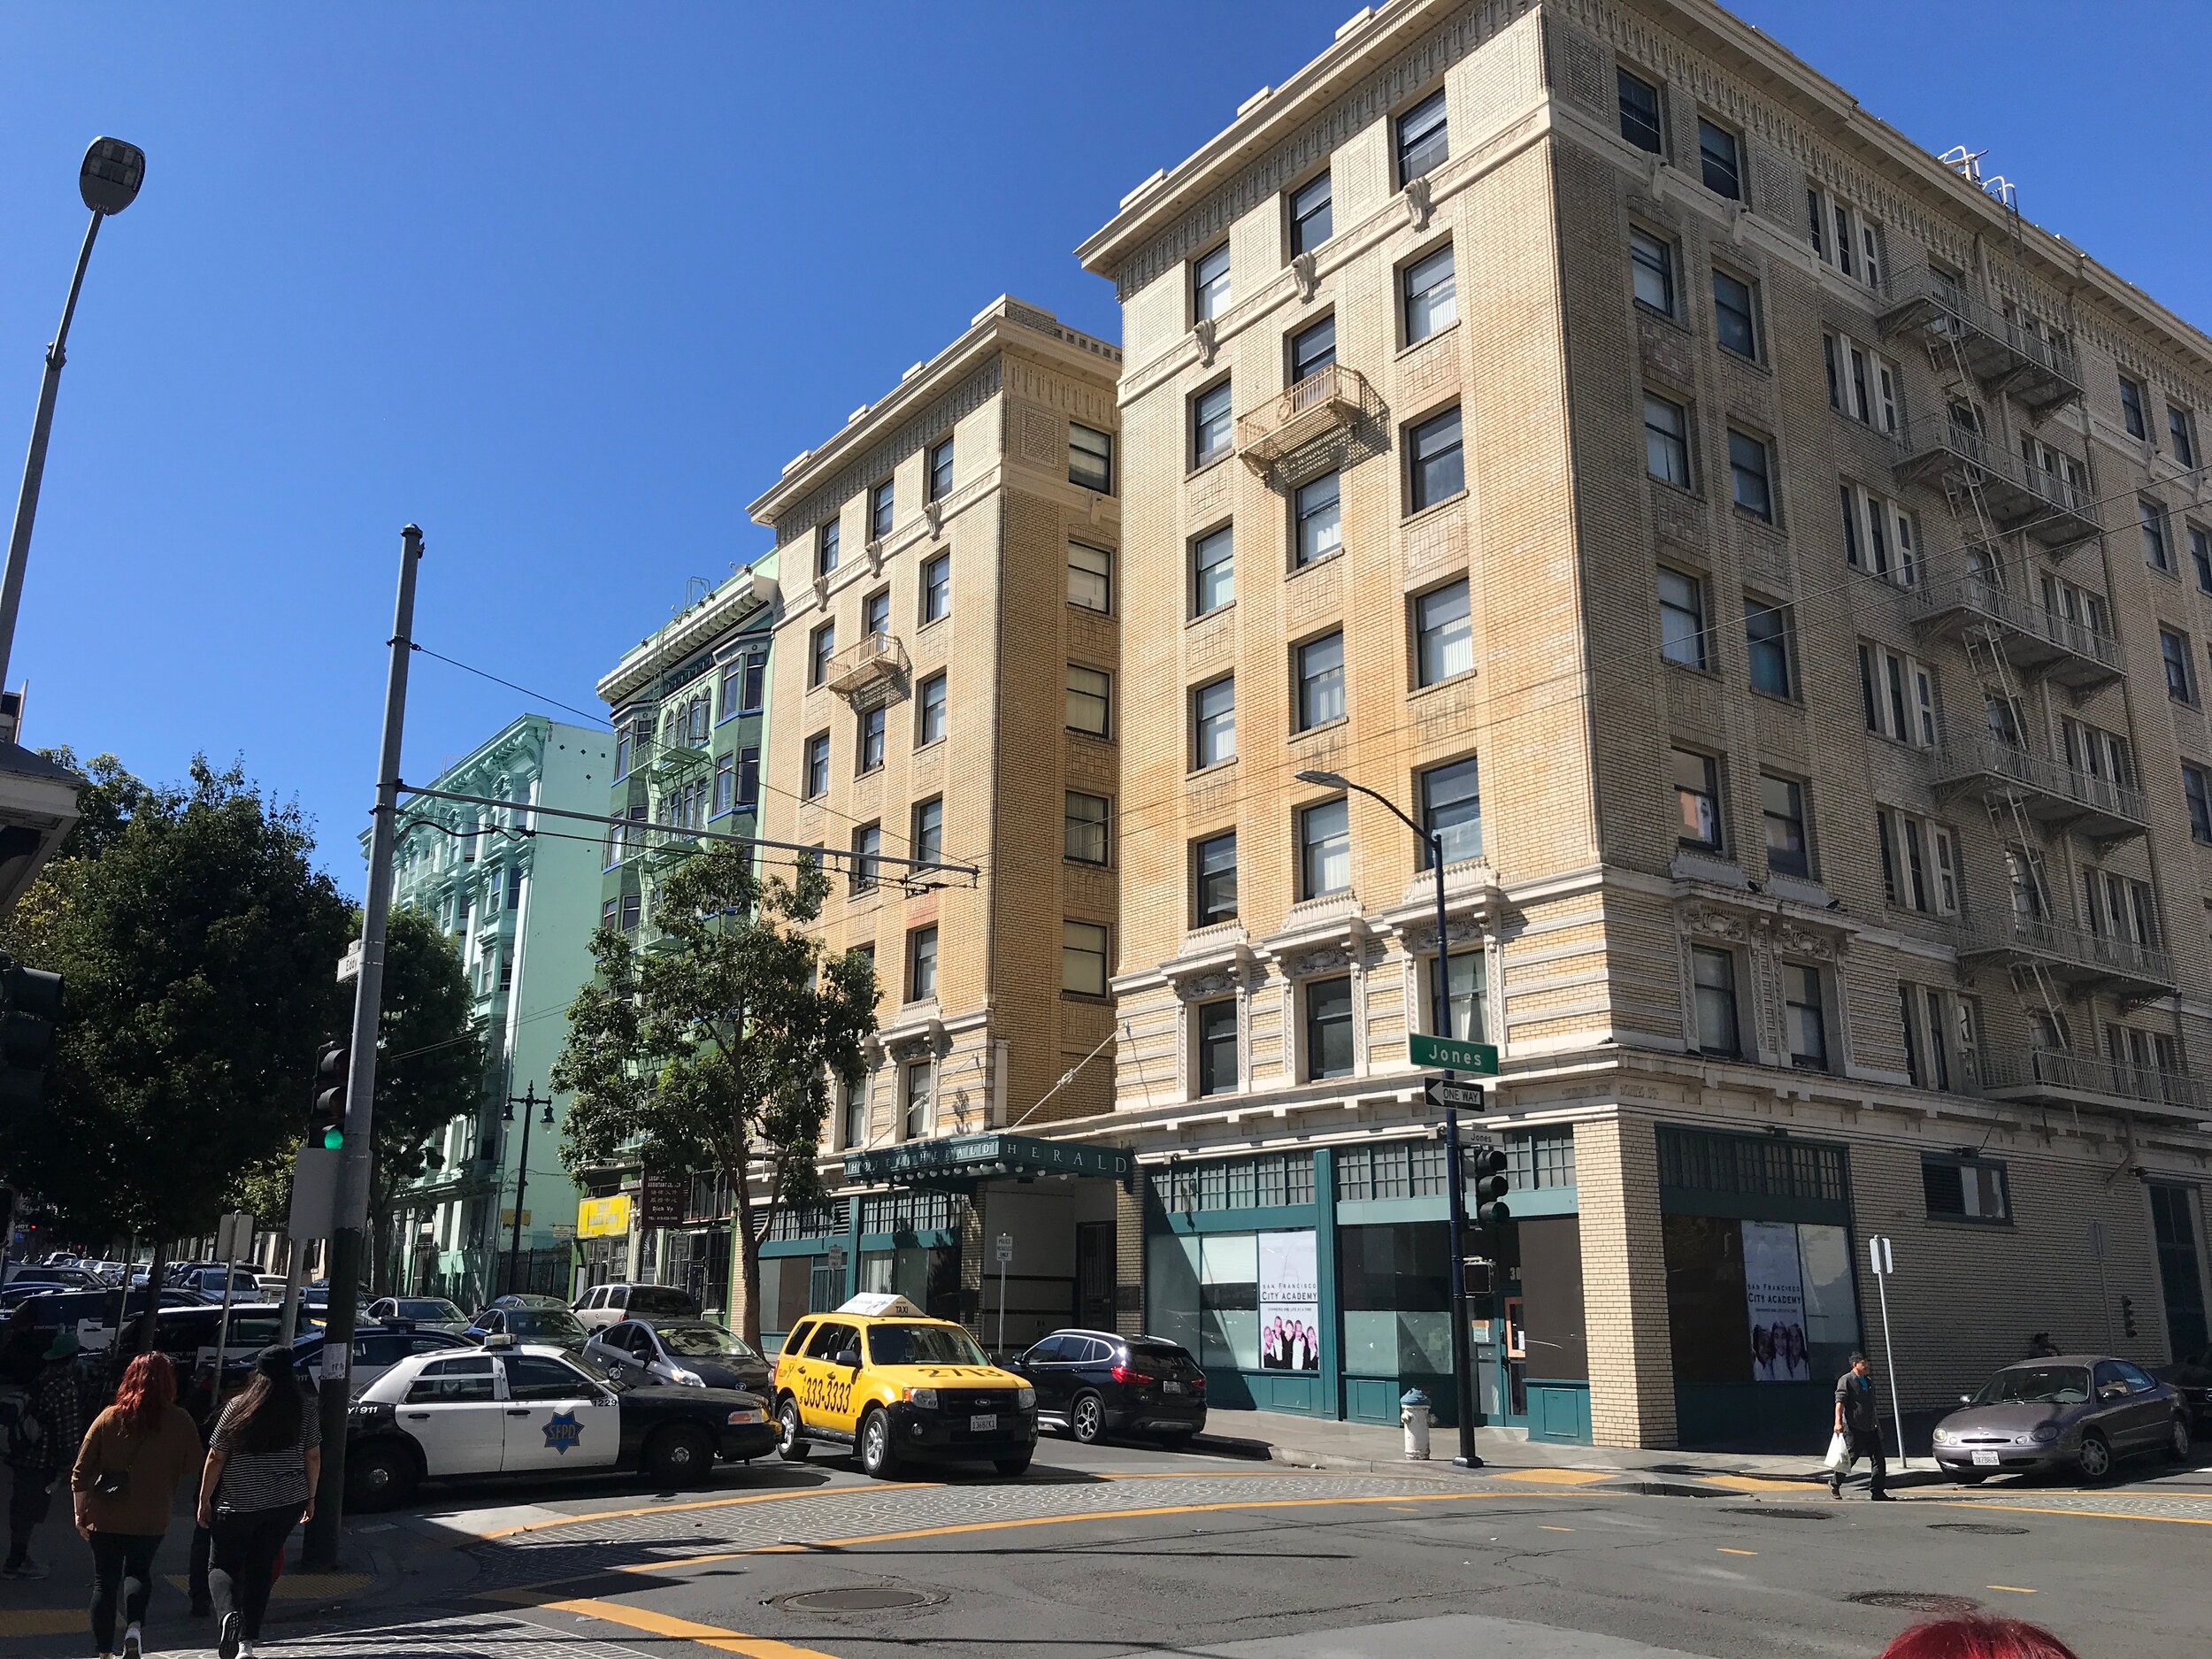  Rebuilt quickly after the 1906 earthquake and fire, the Tenderloin was suited to the development of residential hotels, a housing type that defined the neighborhood. More than 400 Tenderloin buildings are protected as historical structures. 